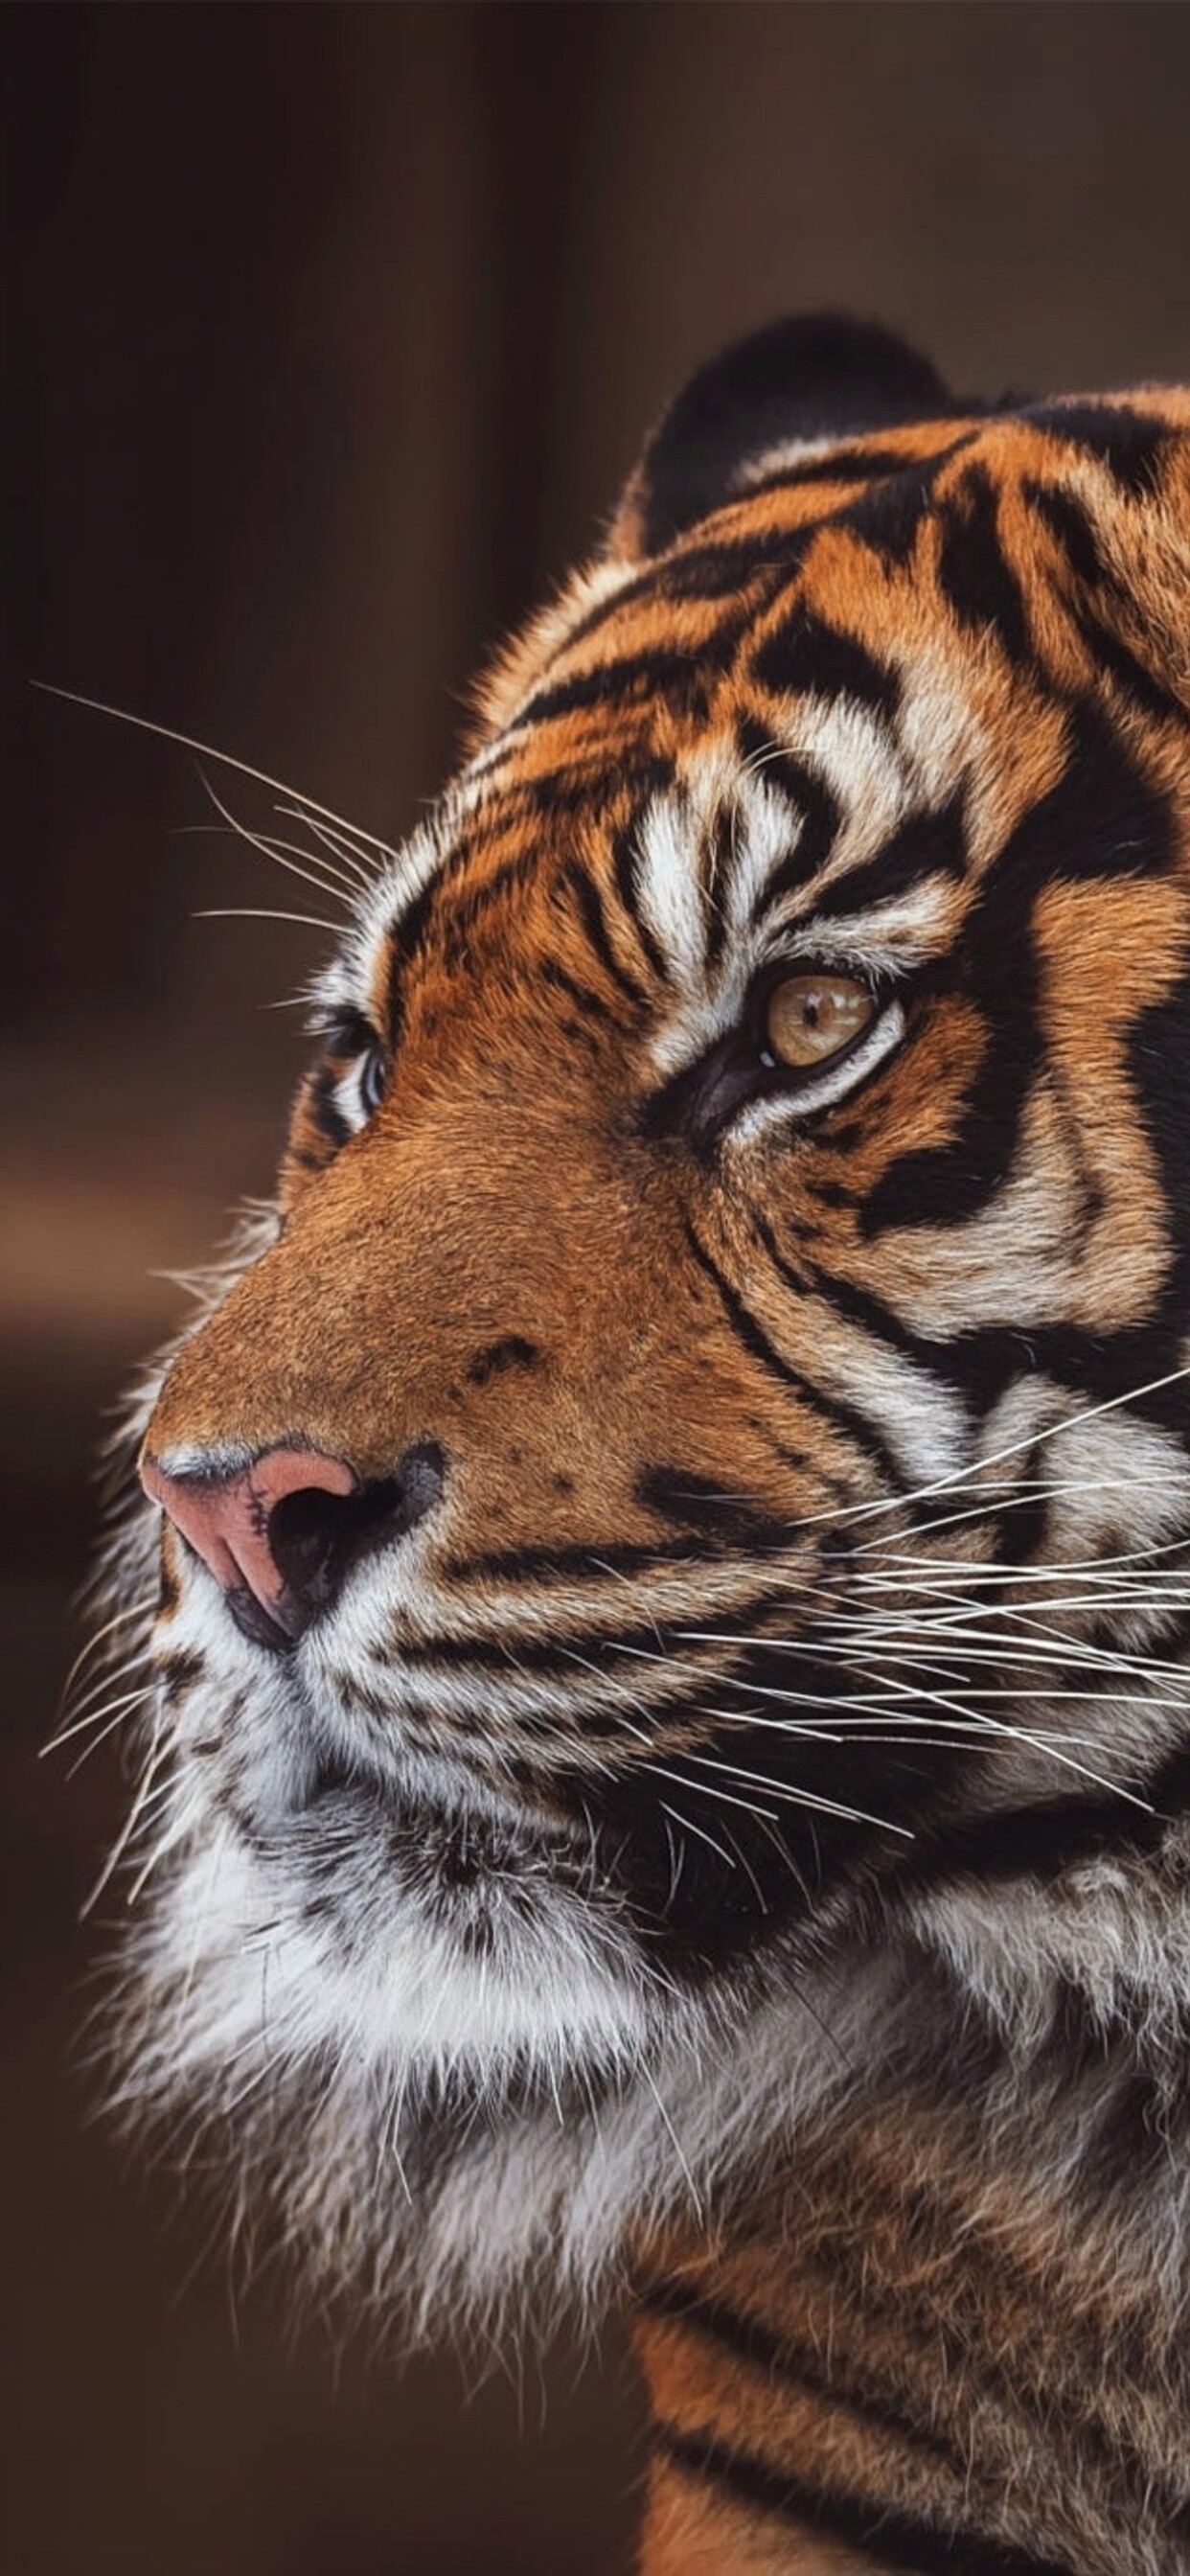 Tiger: Like a human fingerprint, no two tigers have the exact same markings. 1250x2690 HD Background.